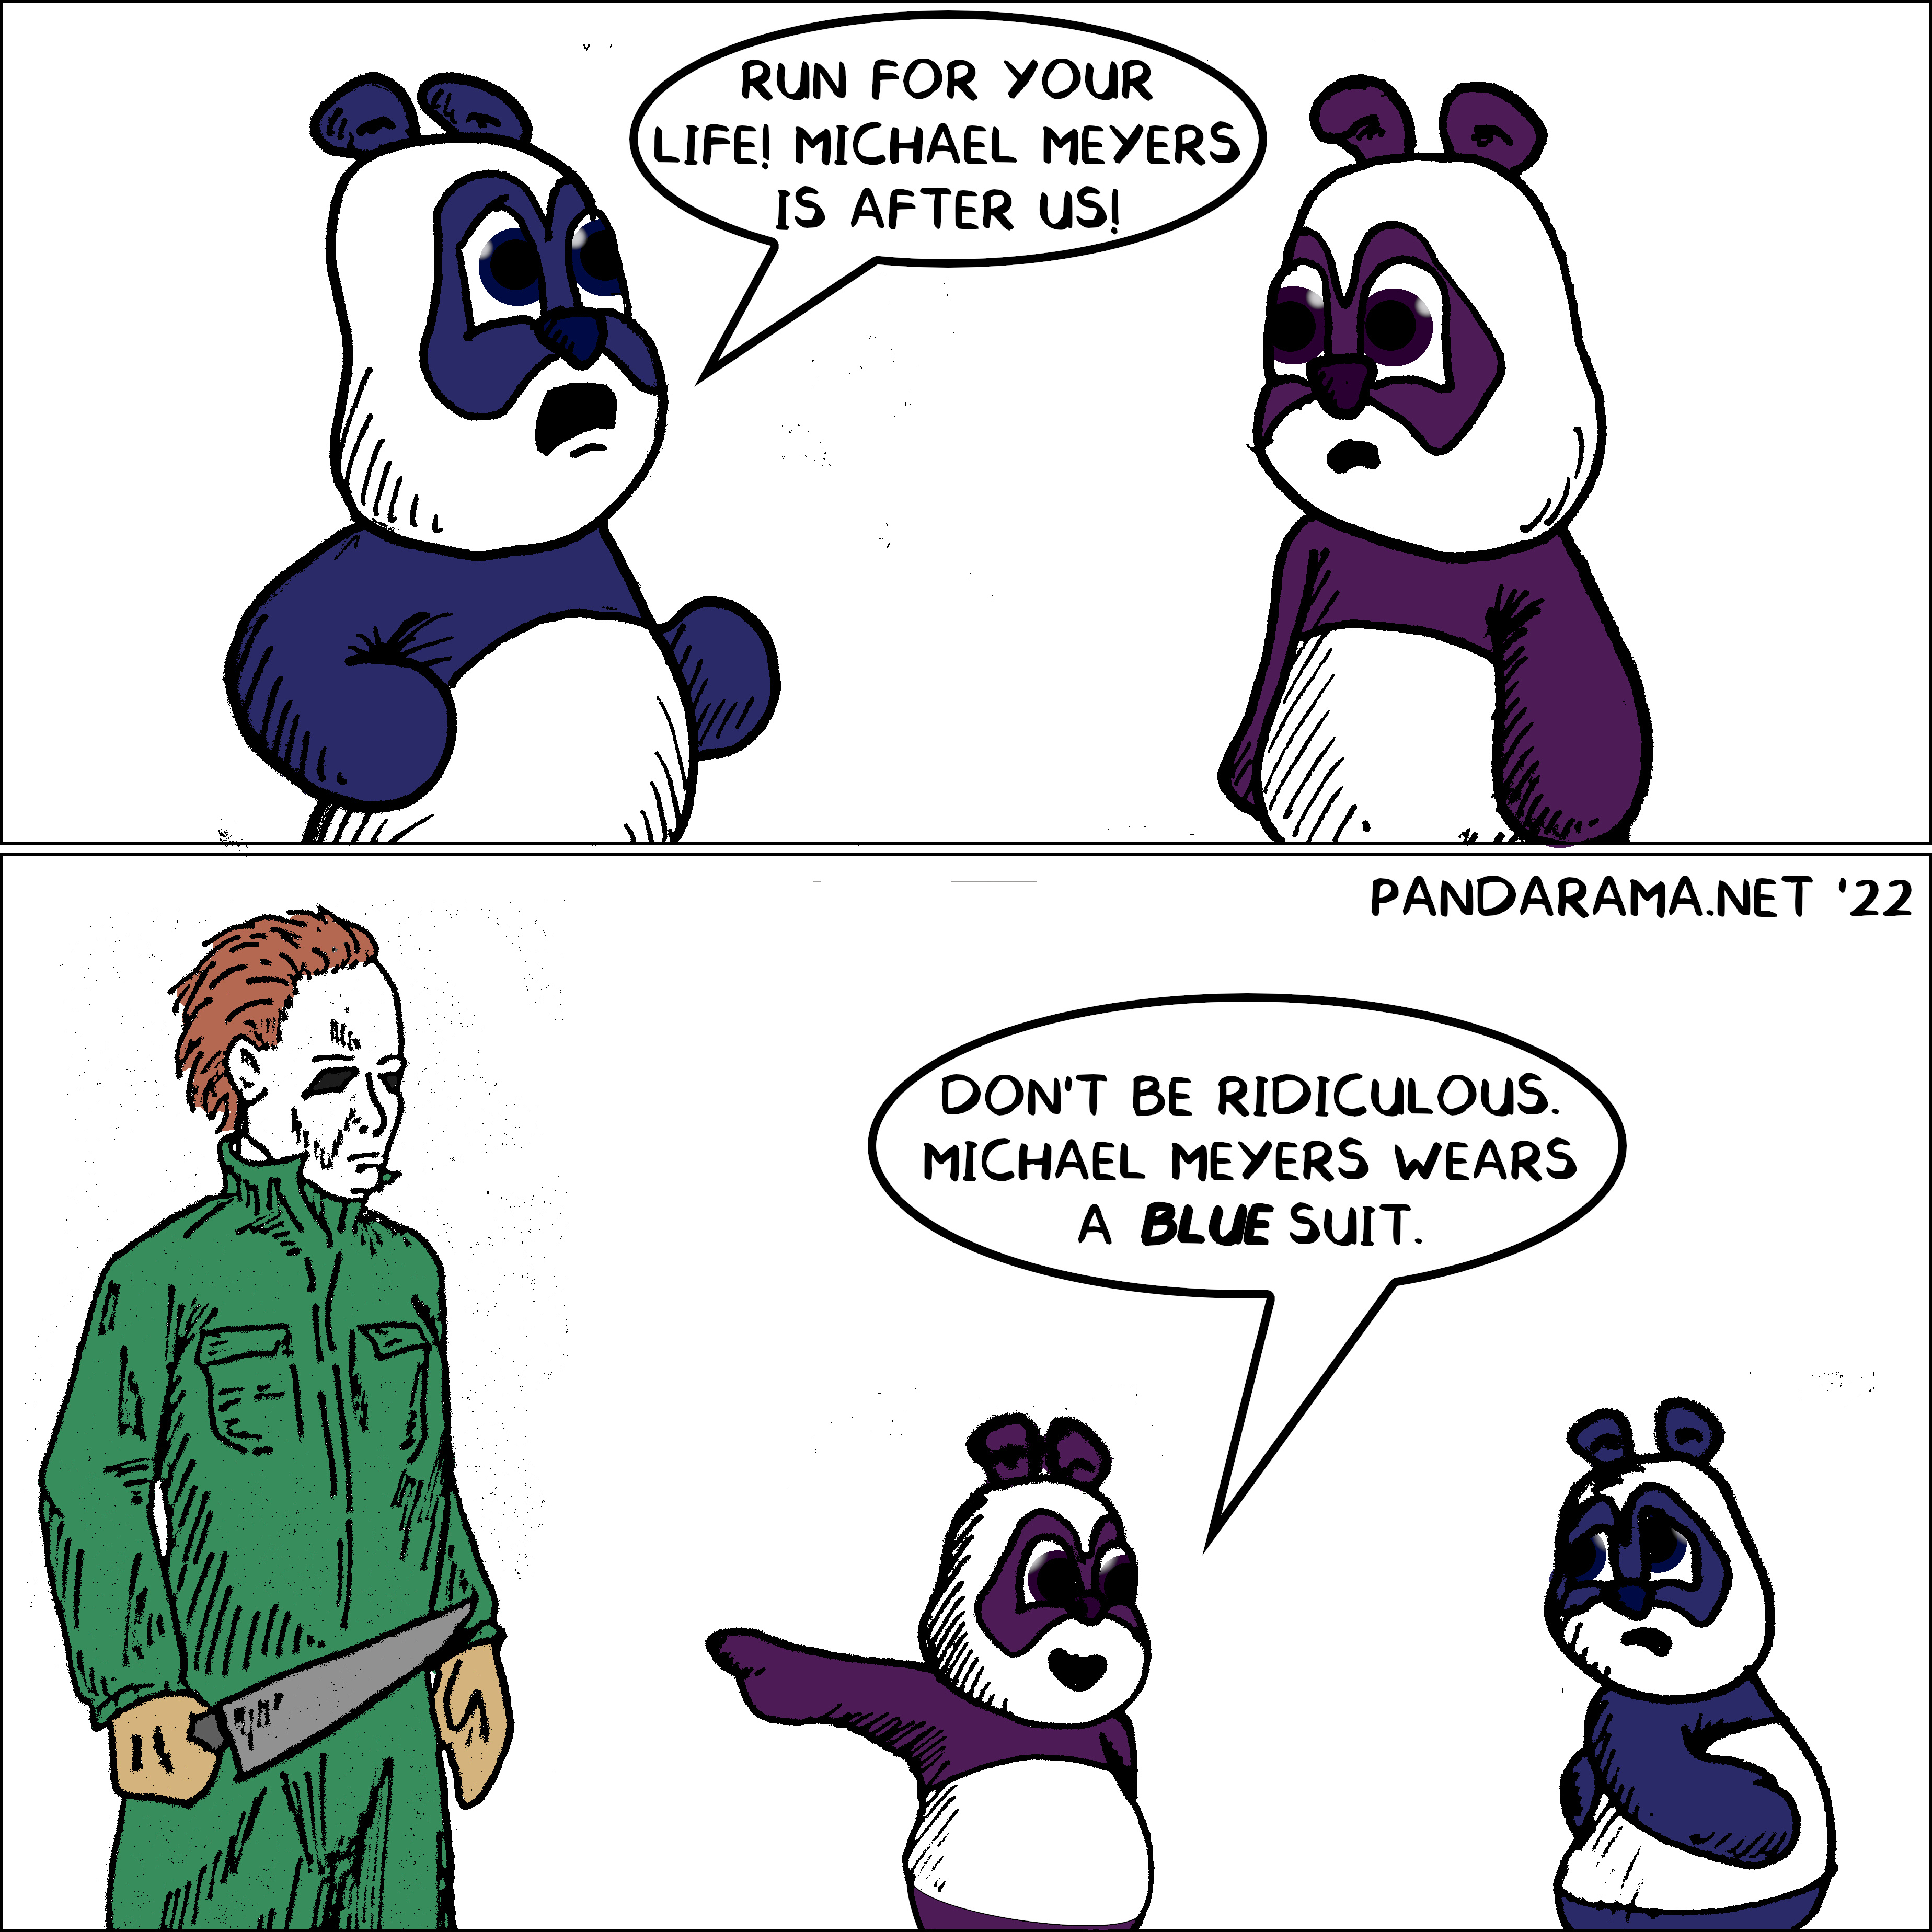 A panda runs from man in mask and green jump suit and says 'Run away! Michael Myers is after us. Other panda says'You're being ridiculous, Michael Myers wears a blue suit.'